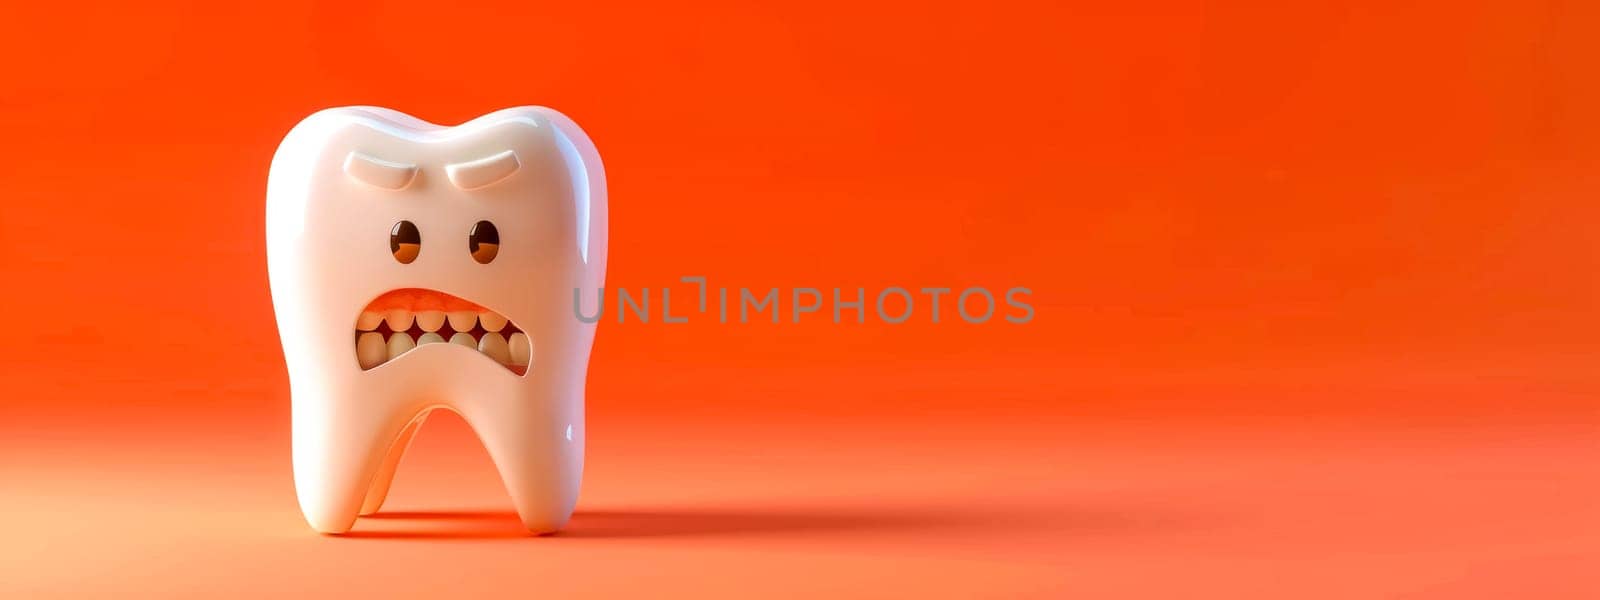 Angry cartoon tooth on orange background by Edophoto